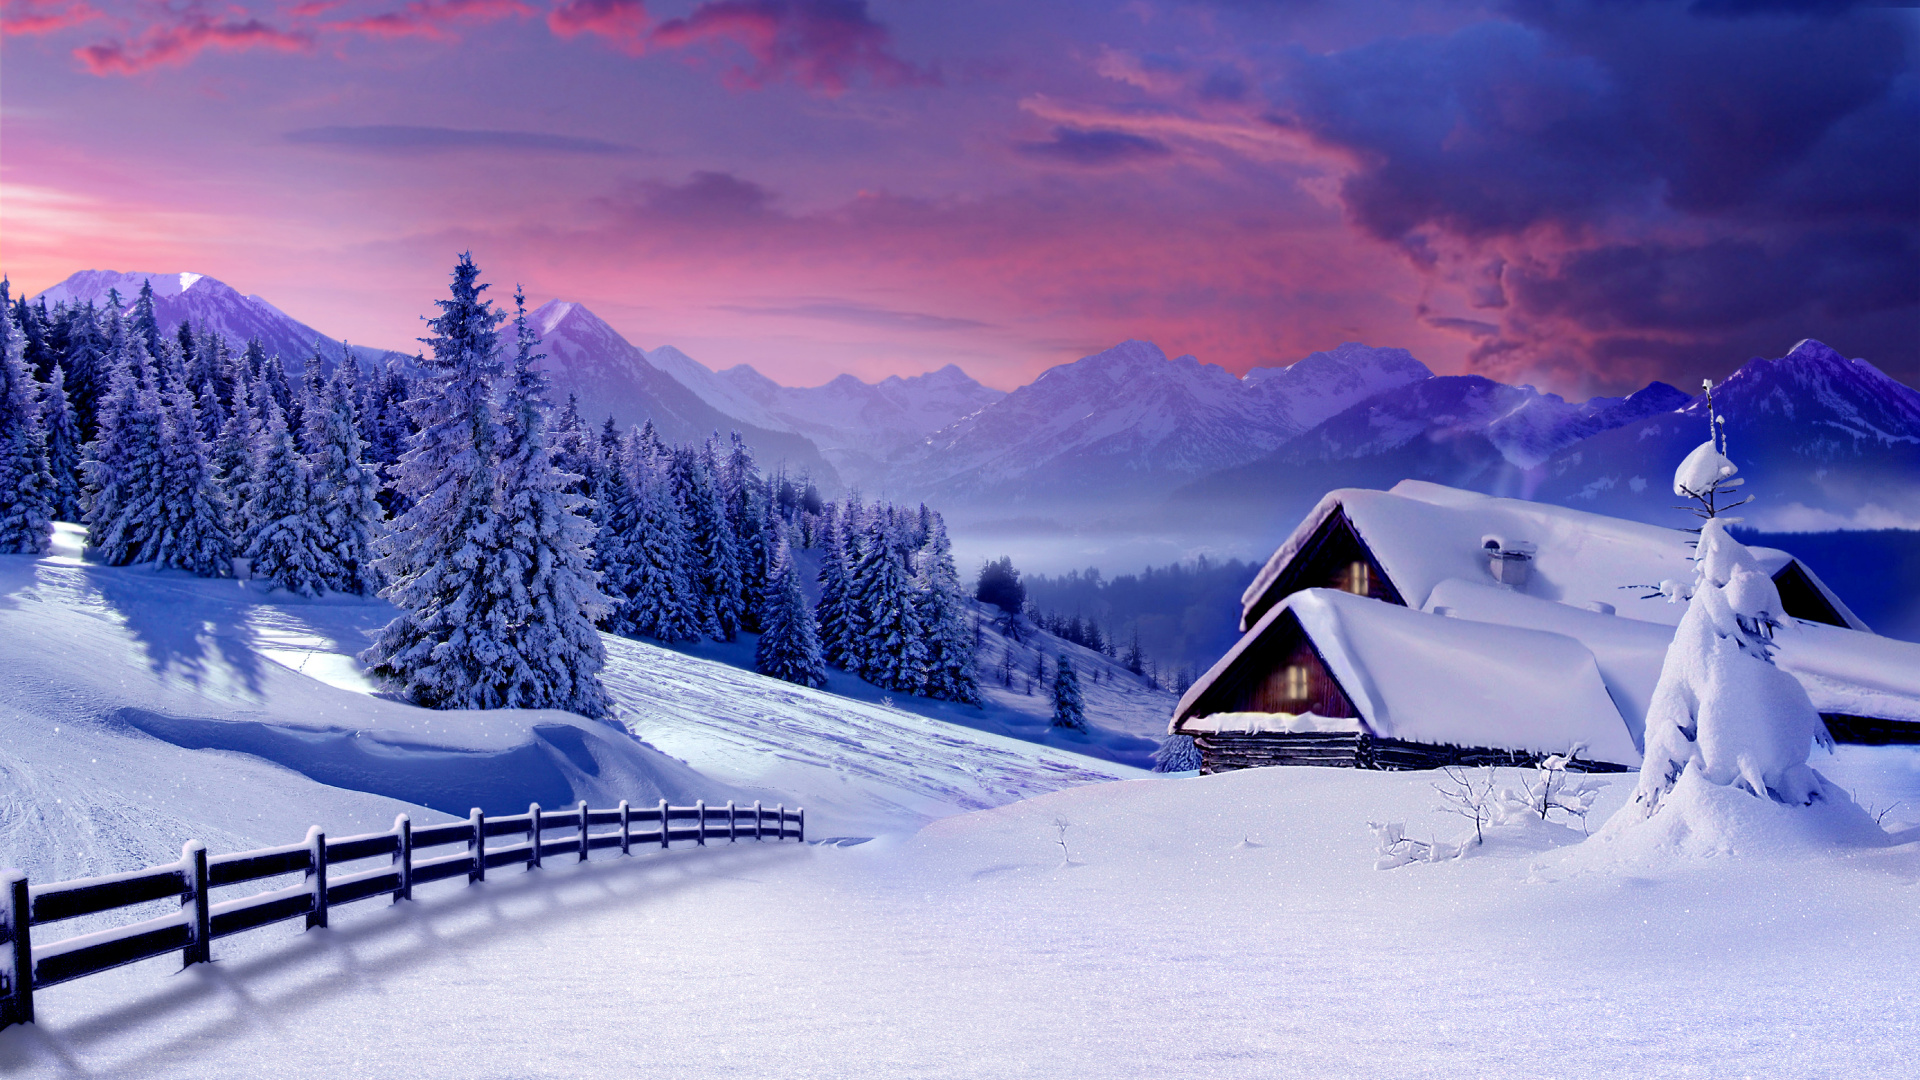 Brown Wooden House on Snow Covered Ground Near Trees and Mountains During Daytime. Wallpaper in 1920x1080 Resolution